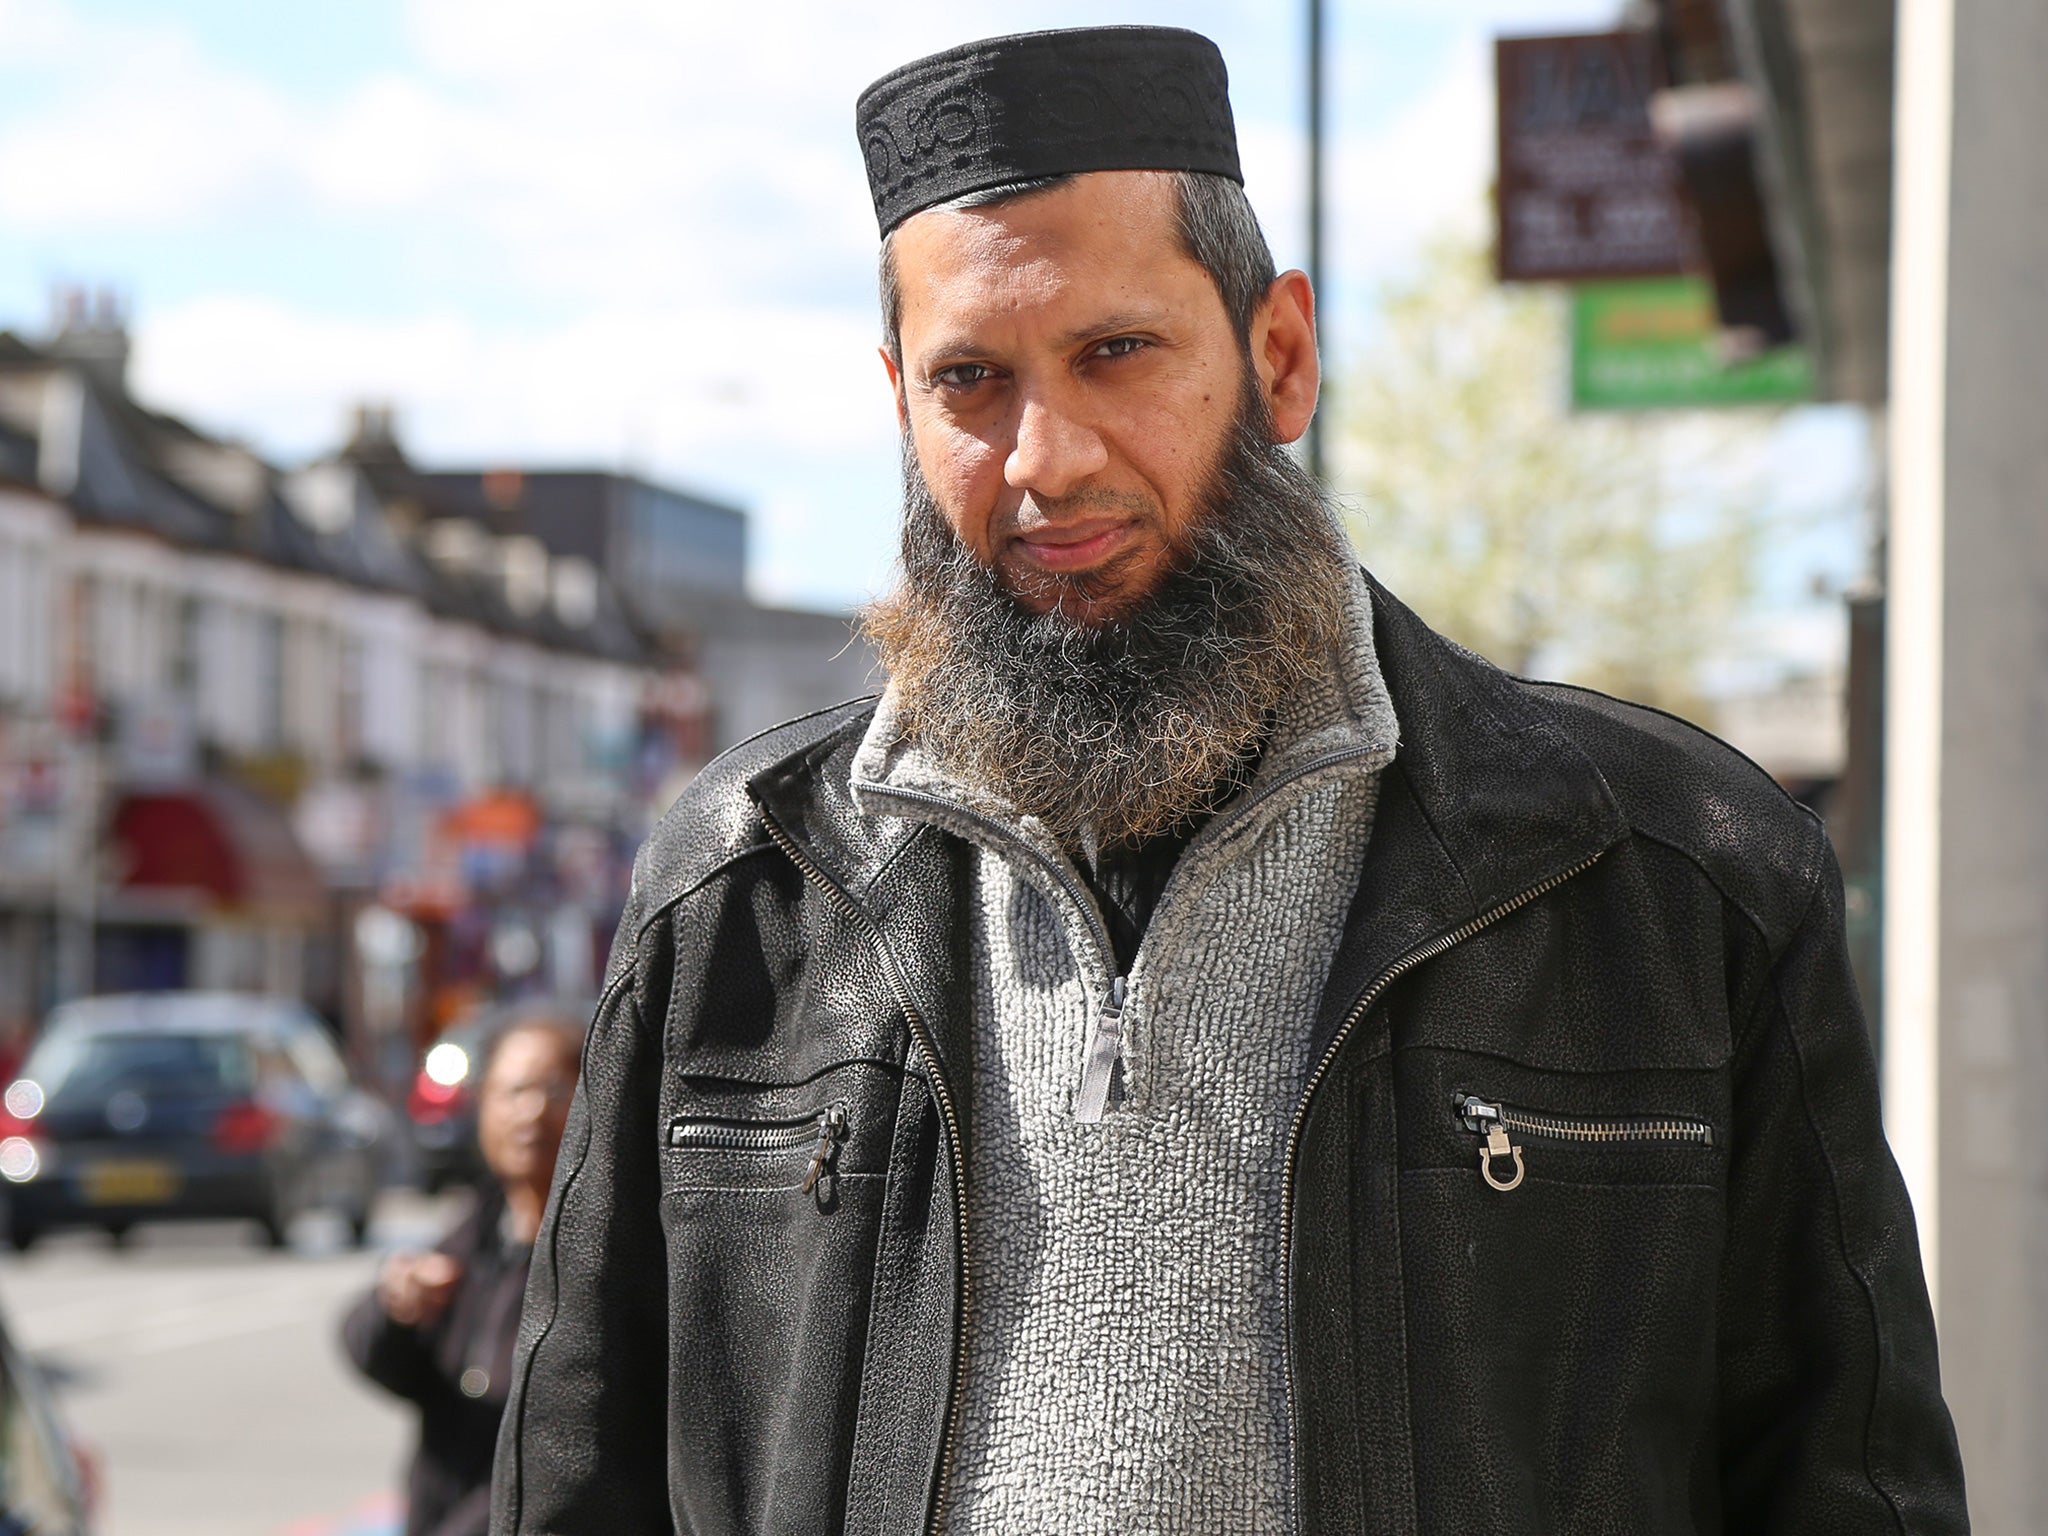 Suliman Gani has strongly denied having links to Isis